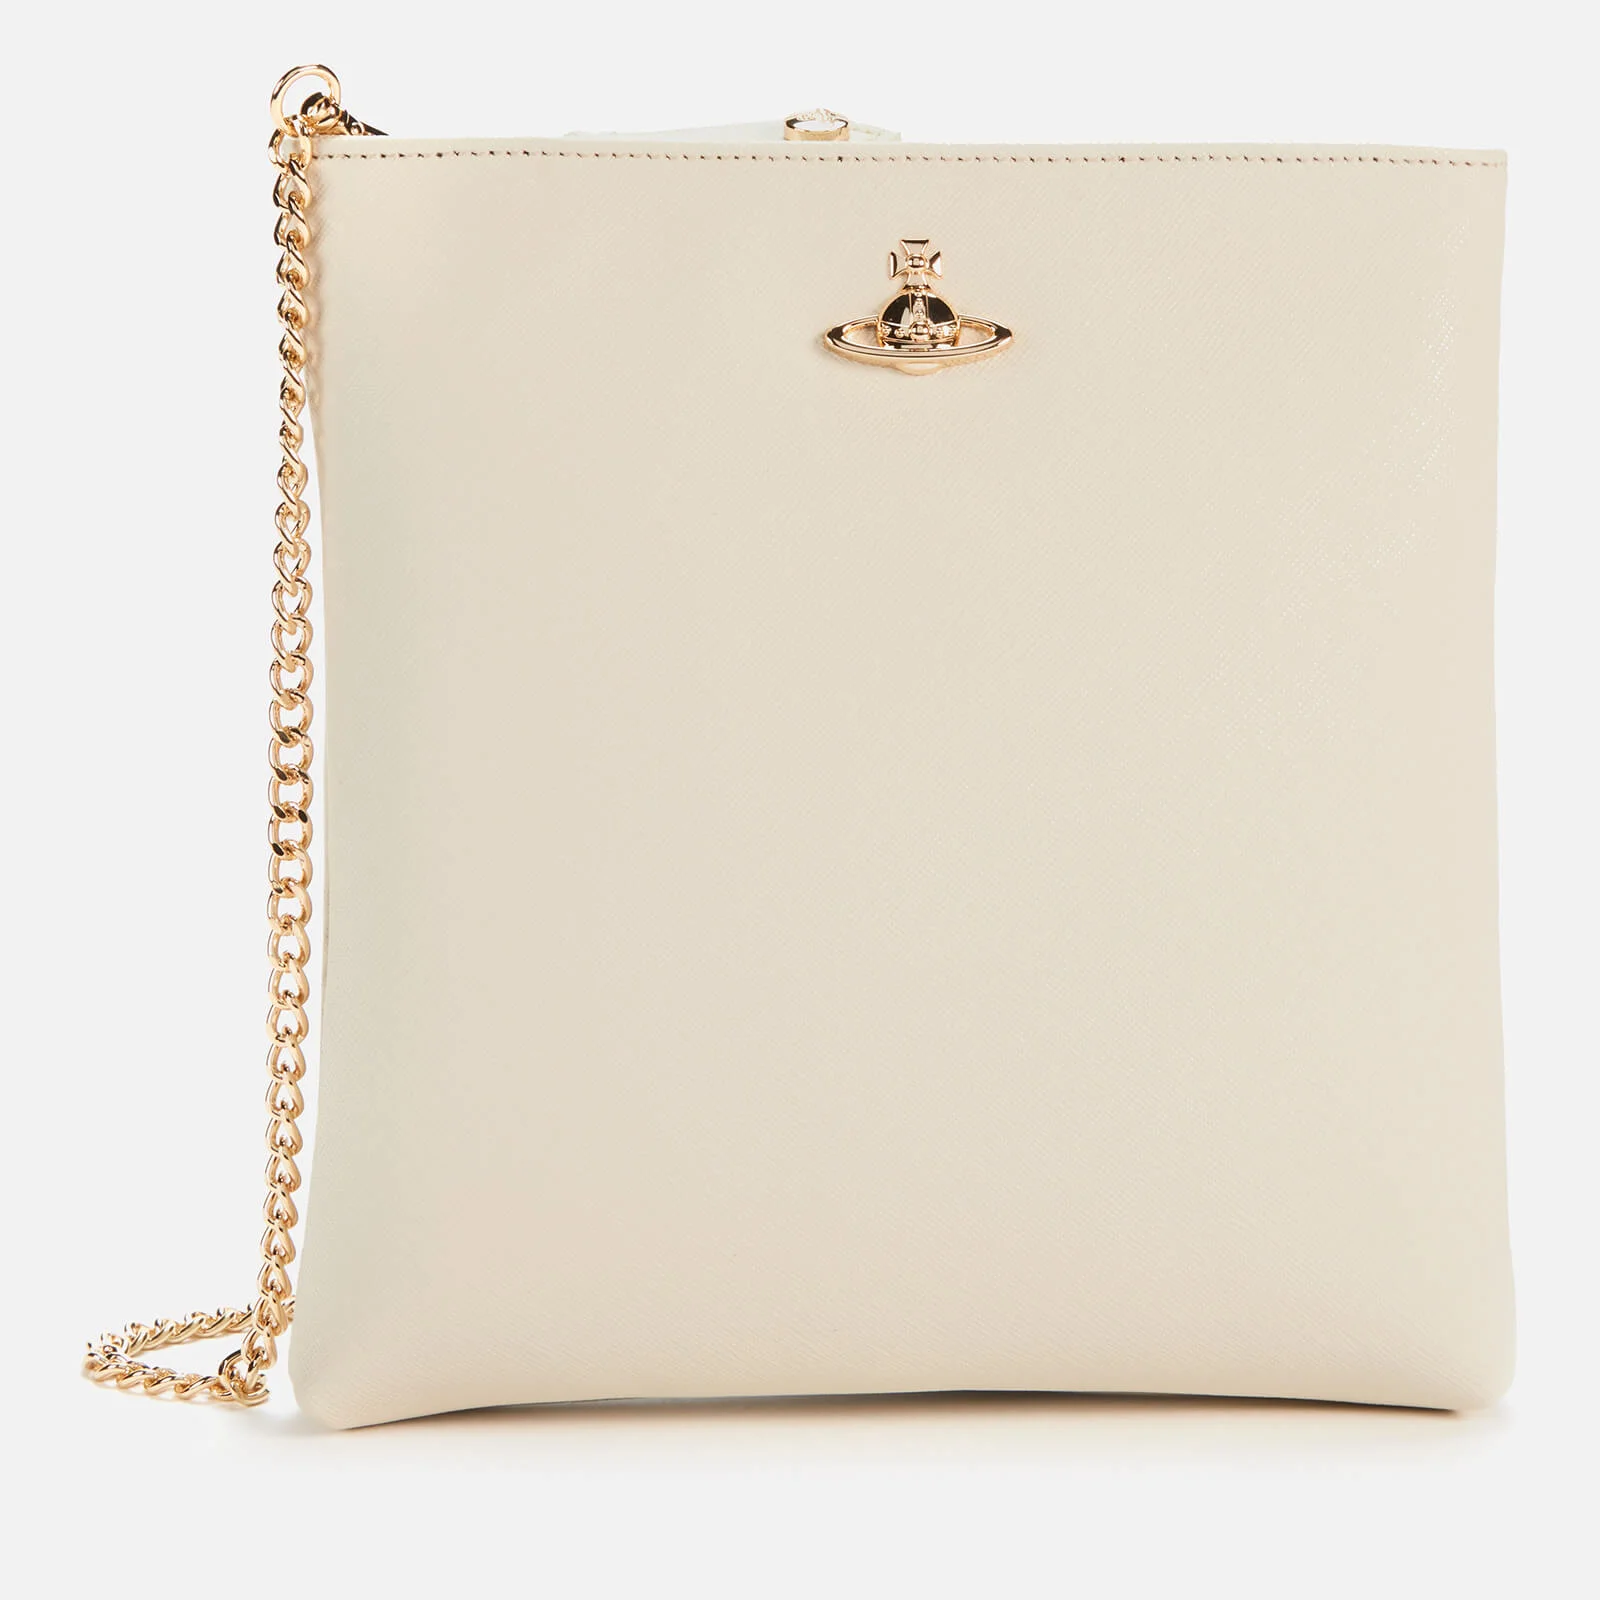 Vivienne Westwood Women's Victoria Square Cross Body with Chain - Ivory Image 1